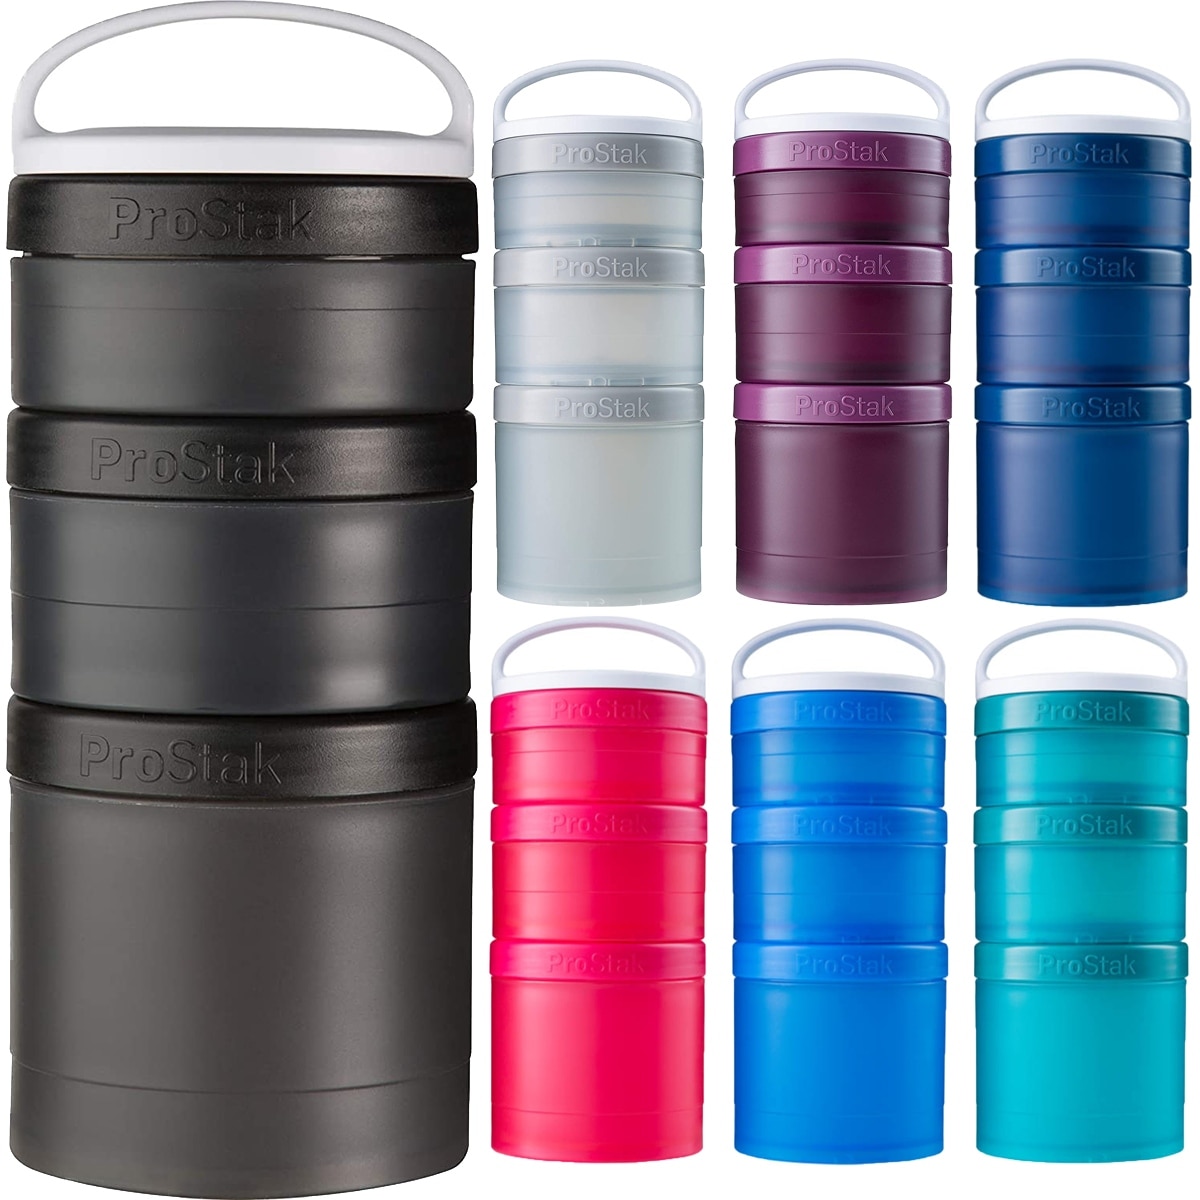 https://ak1.ostkcdn.com/images/products/is/images/direct/62f78adfcf9c57fc9852e1ee203d77371eea2f33/Blender-Bottle-ProStak-Expansion-Pak-with-Handle.jpg